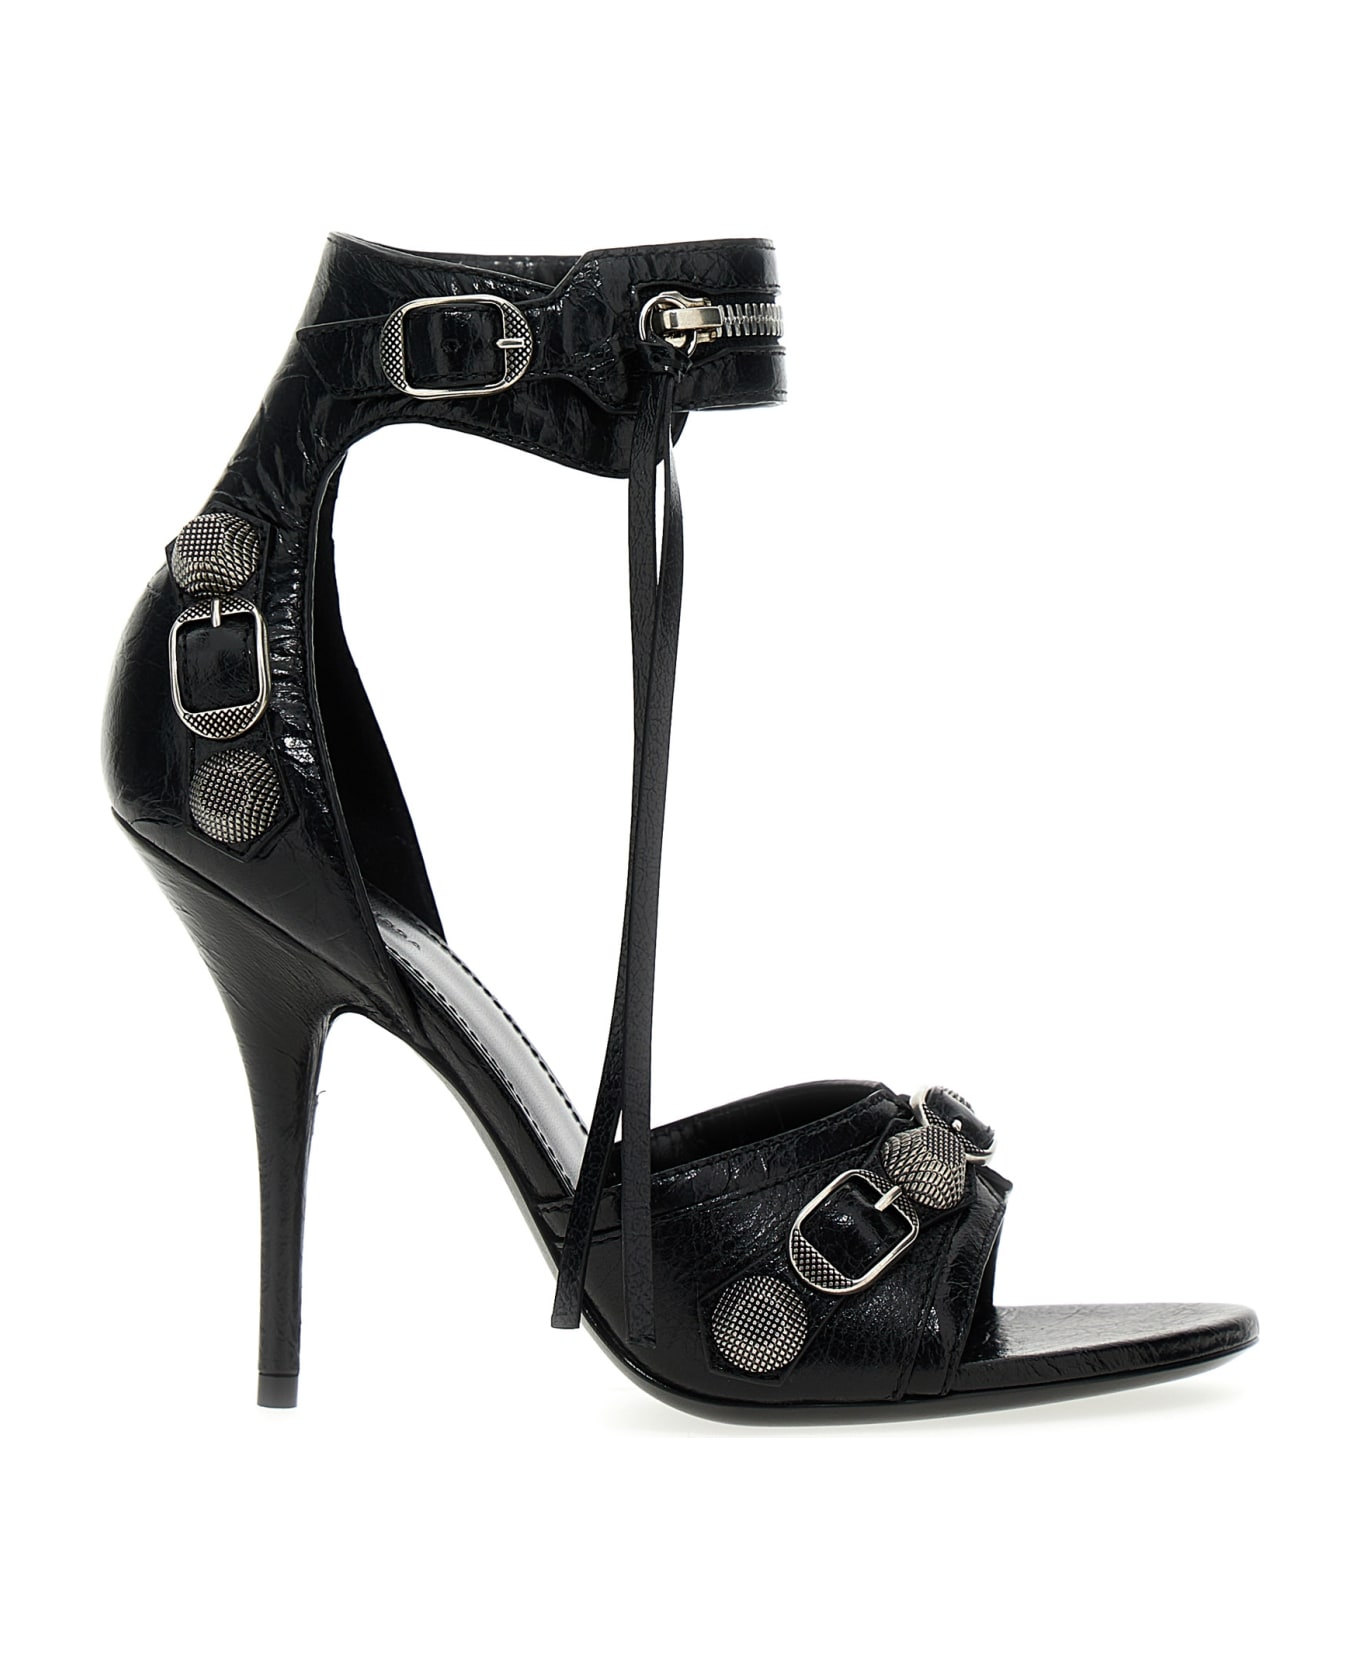 Balenciaga Sandals With Studs And Buckles In Leather - Black